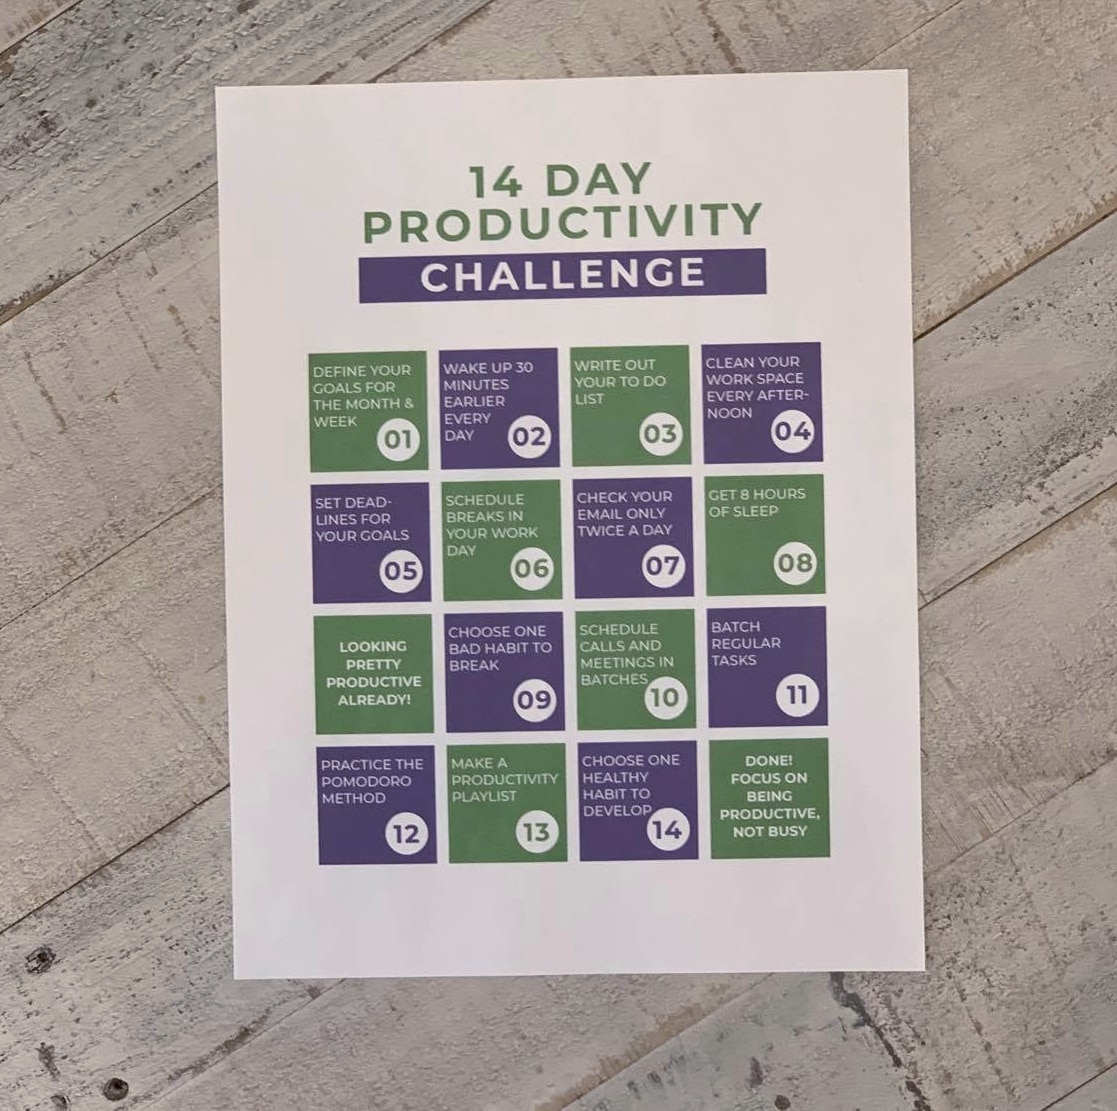 The 14 Day Productivity Challenge